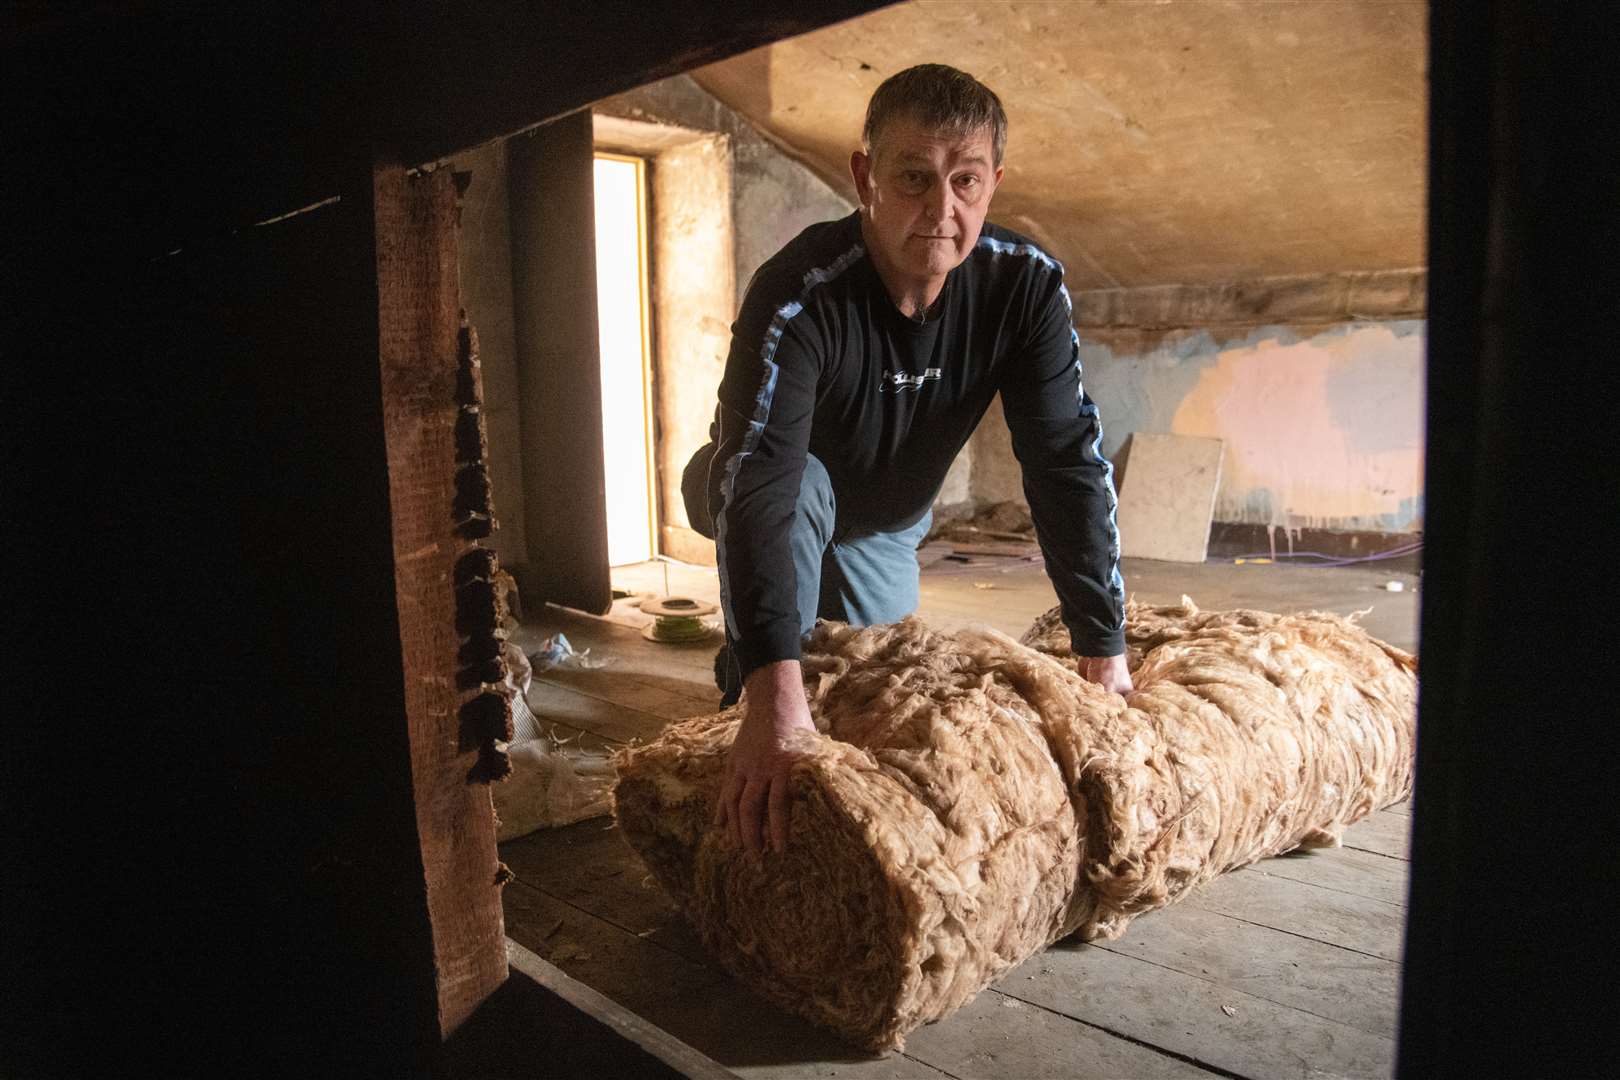 Nick Clark and Forres Area Community Trust will be rolling out new insulation material in the town hall eves. Picture: Daniel Forsyth